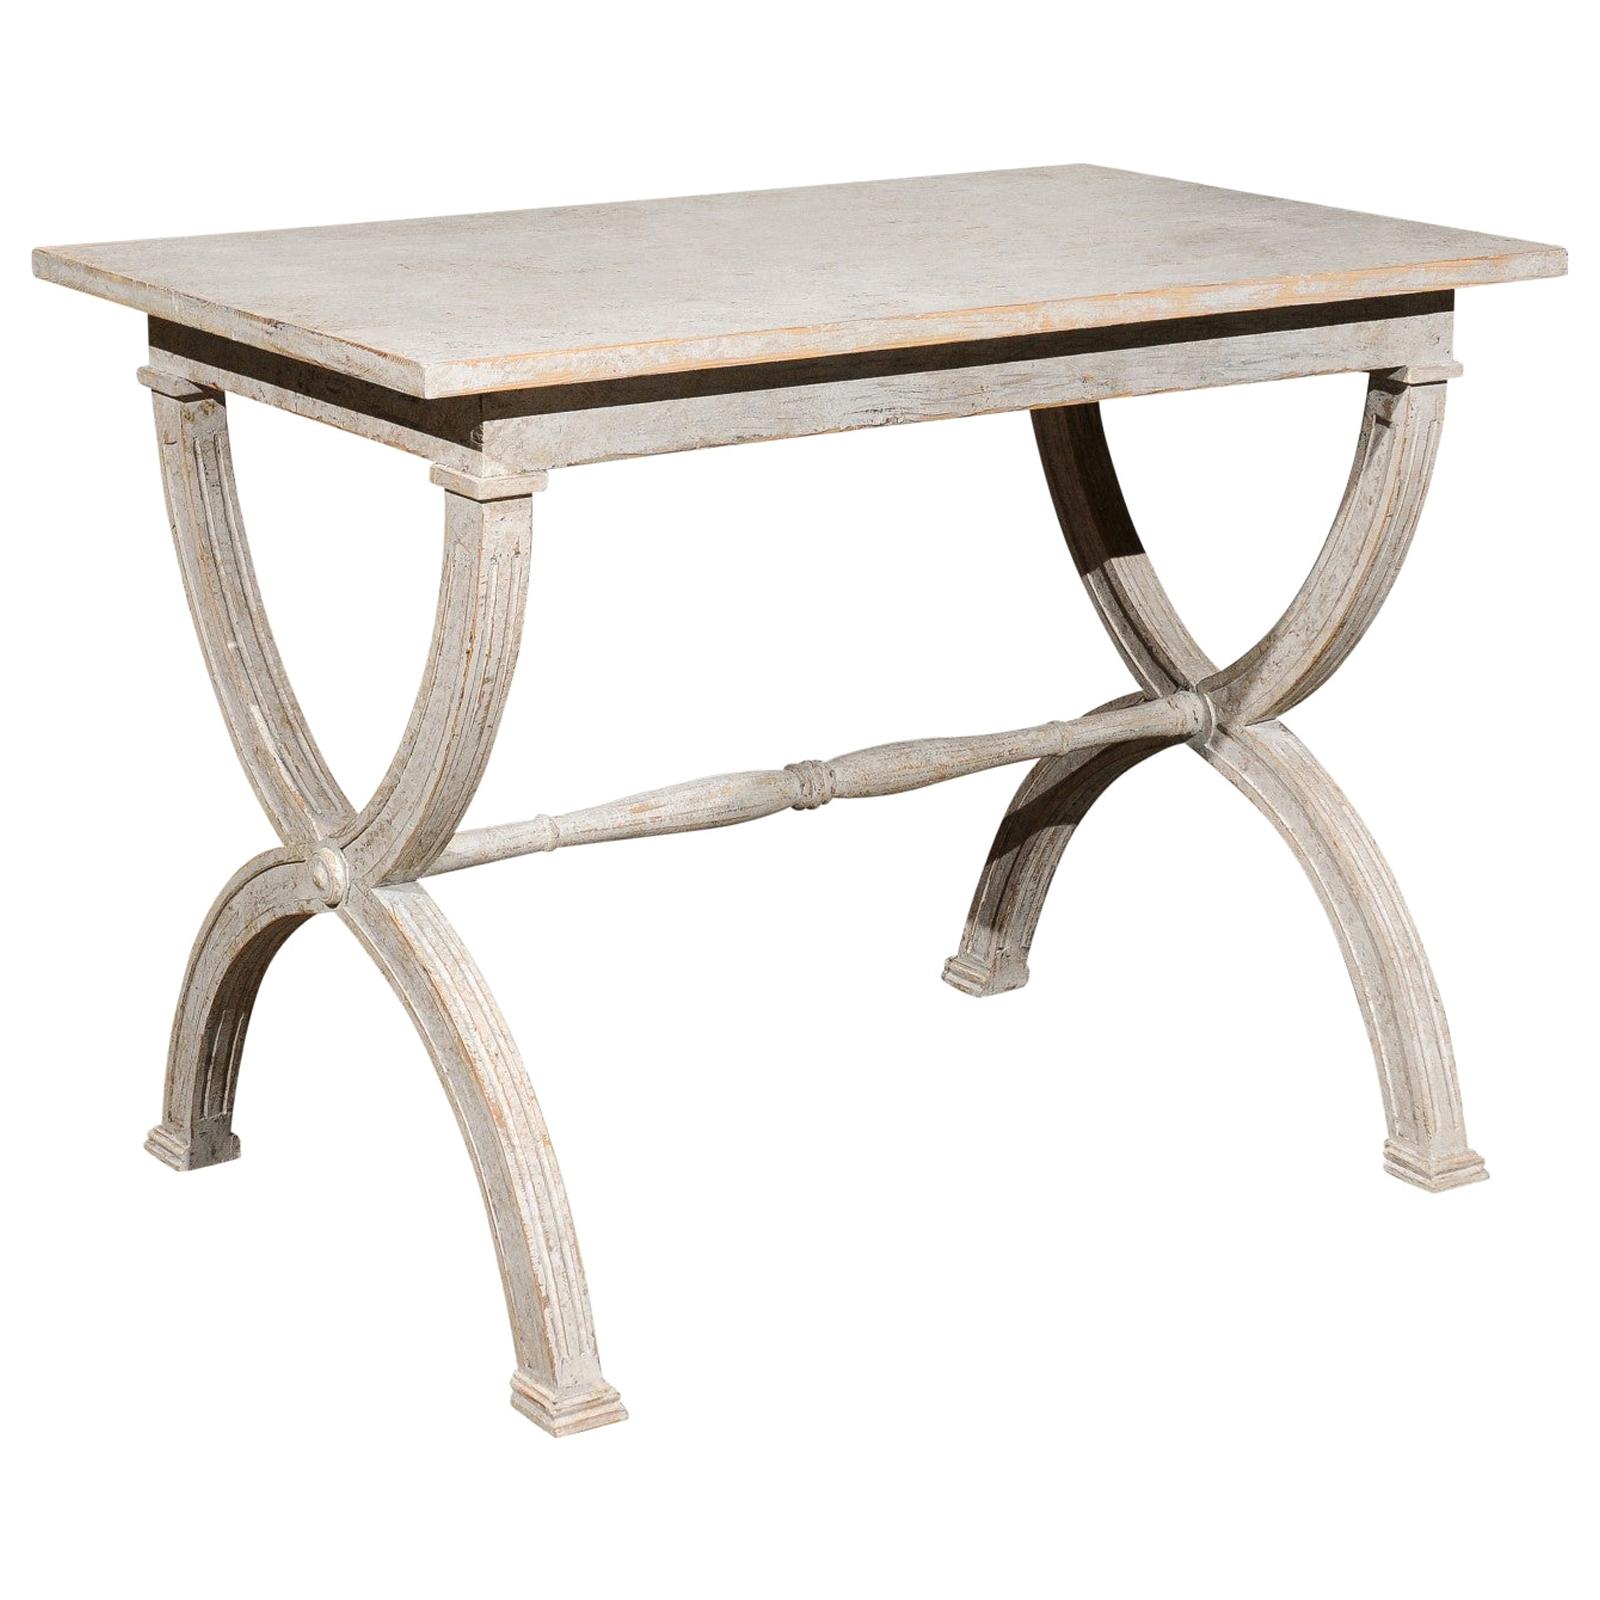 Swedish Gustavian Style Painted Console Table with Curule Base and Stretcher